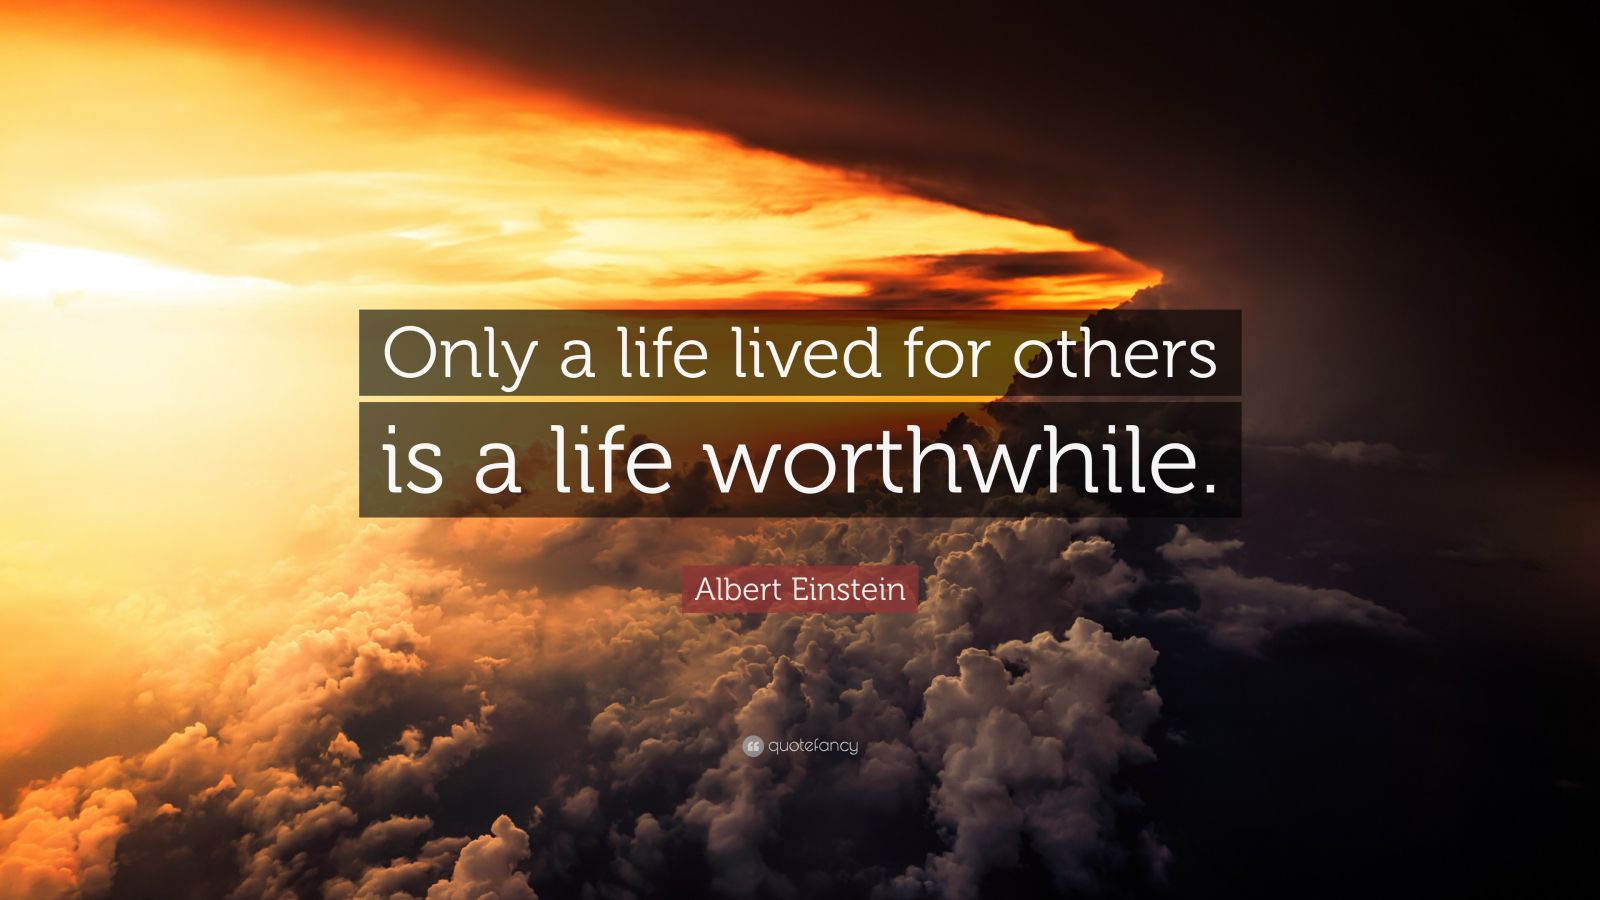 Albert Einstein Quote: “Only a life lived for others is a life